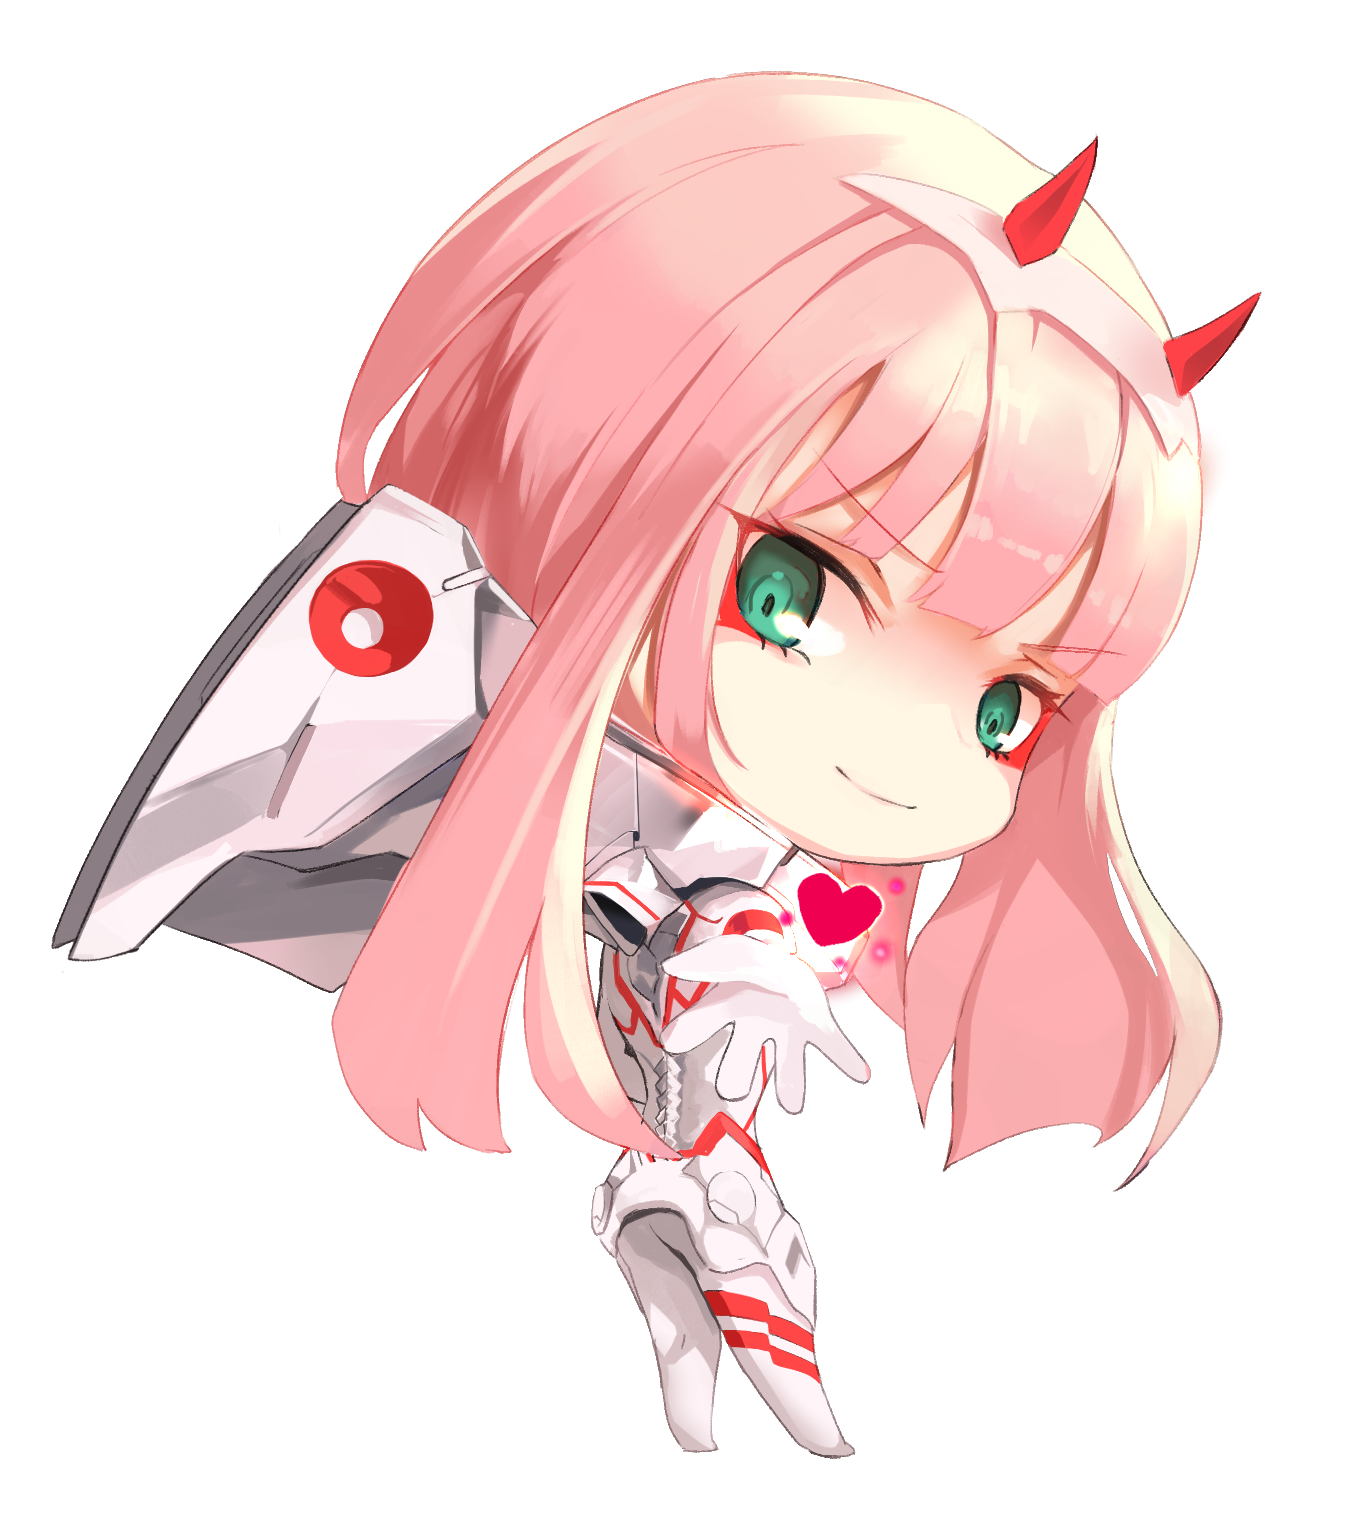 Zero Two PNG Image File